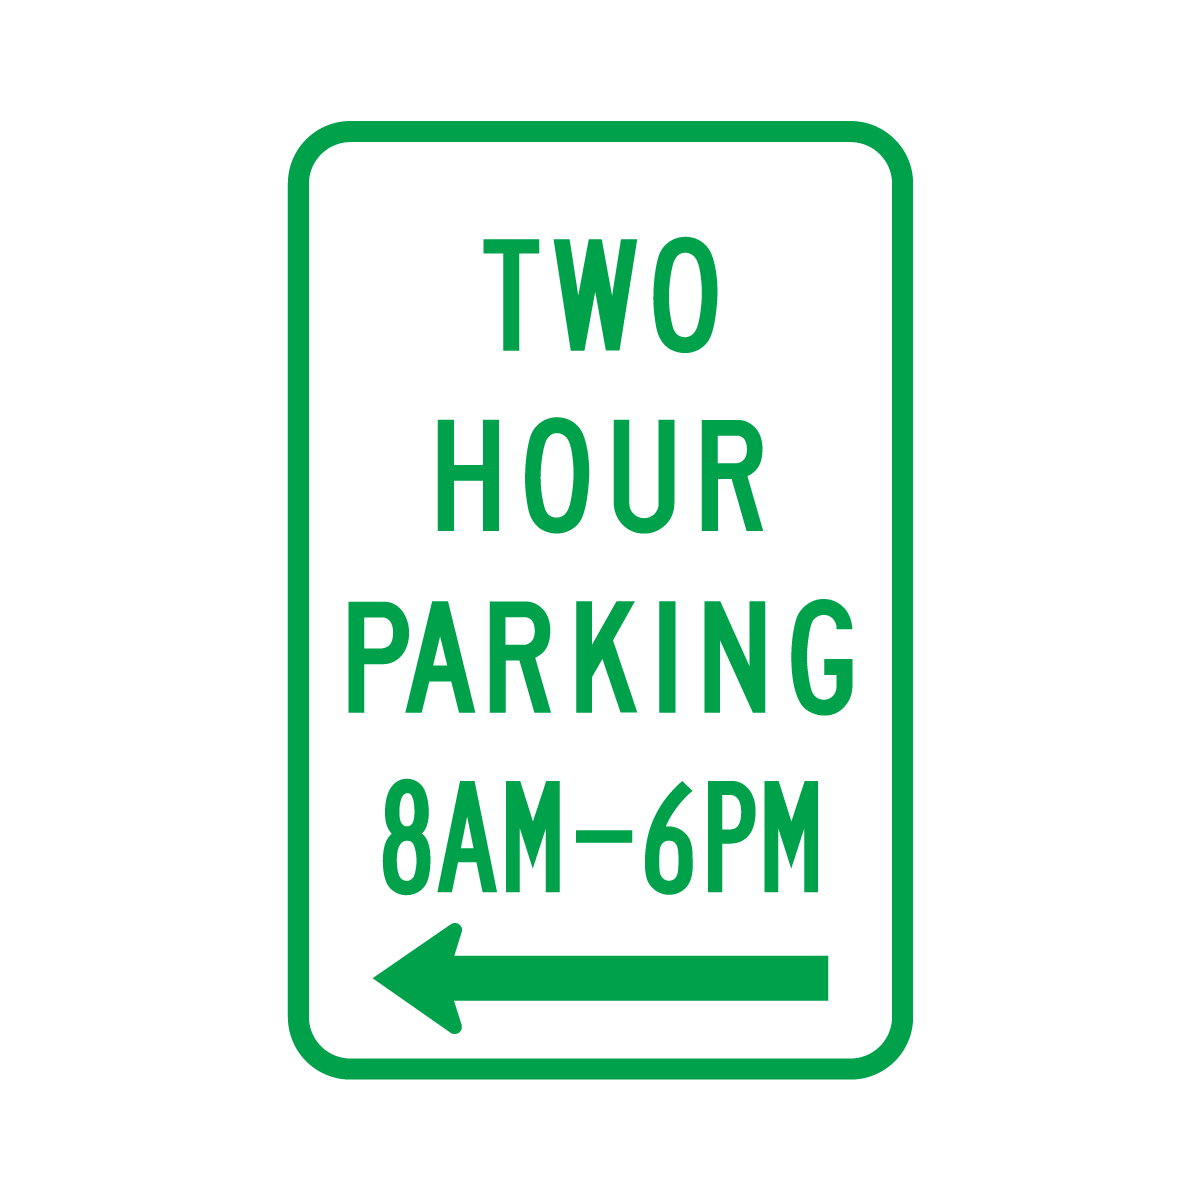 R7-5 (Time) Parking (Times)